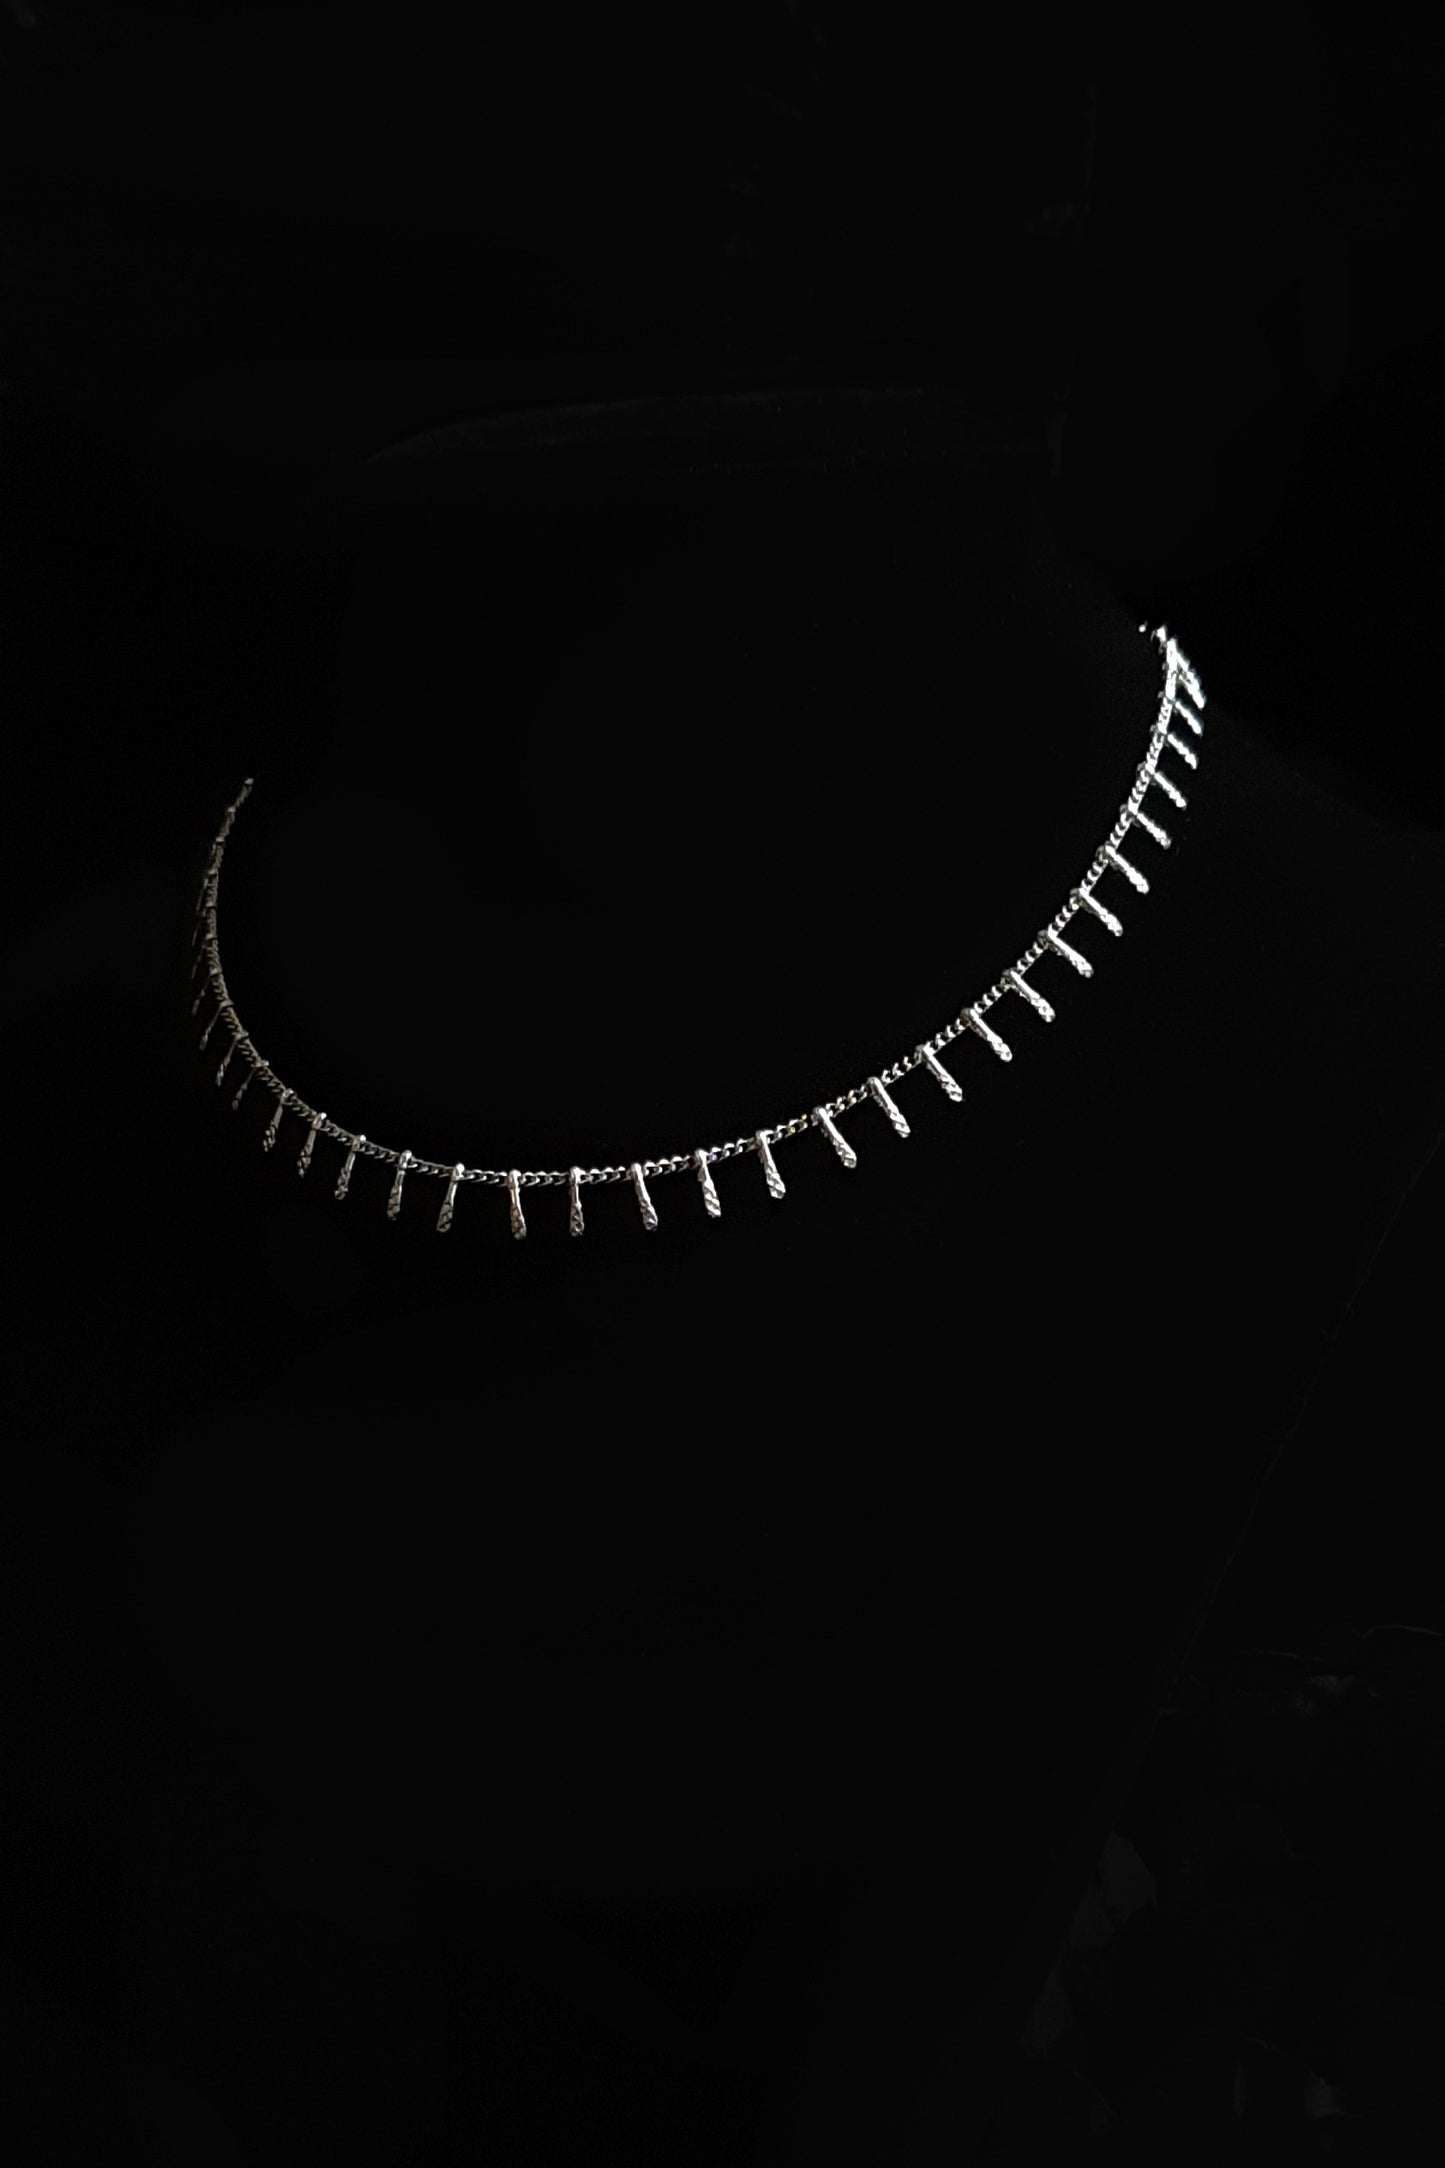 Spark chain choker necklace- 𝖔𝖓𝖊 𝖑𝖊𝖋𝖙 !